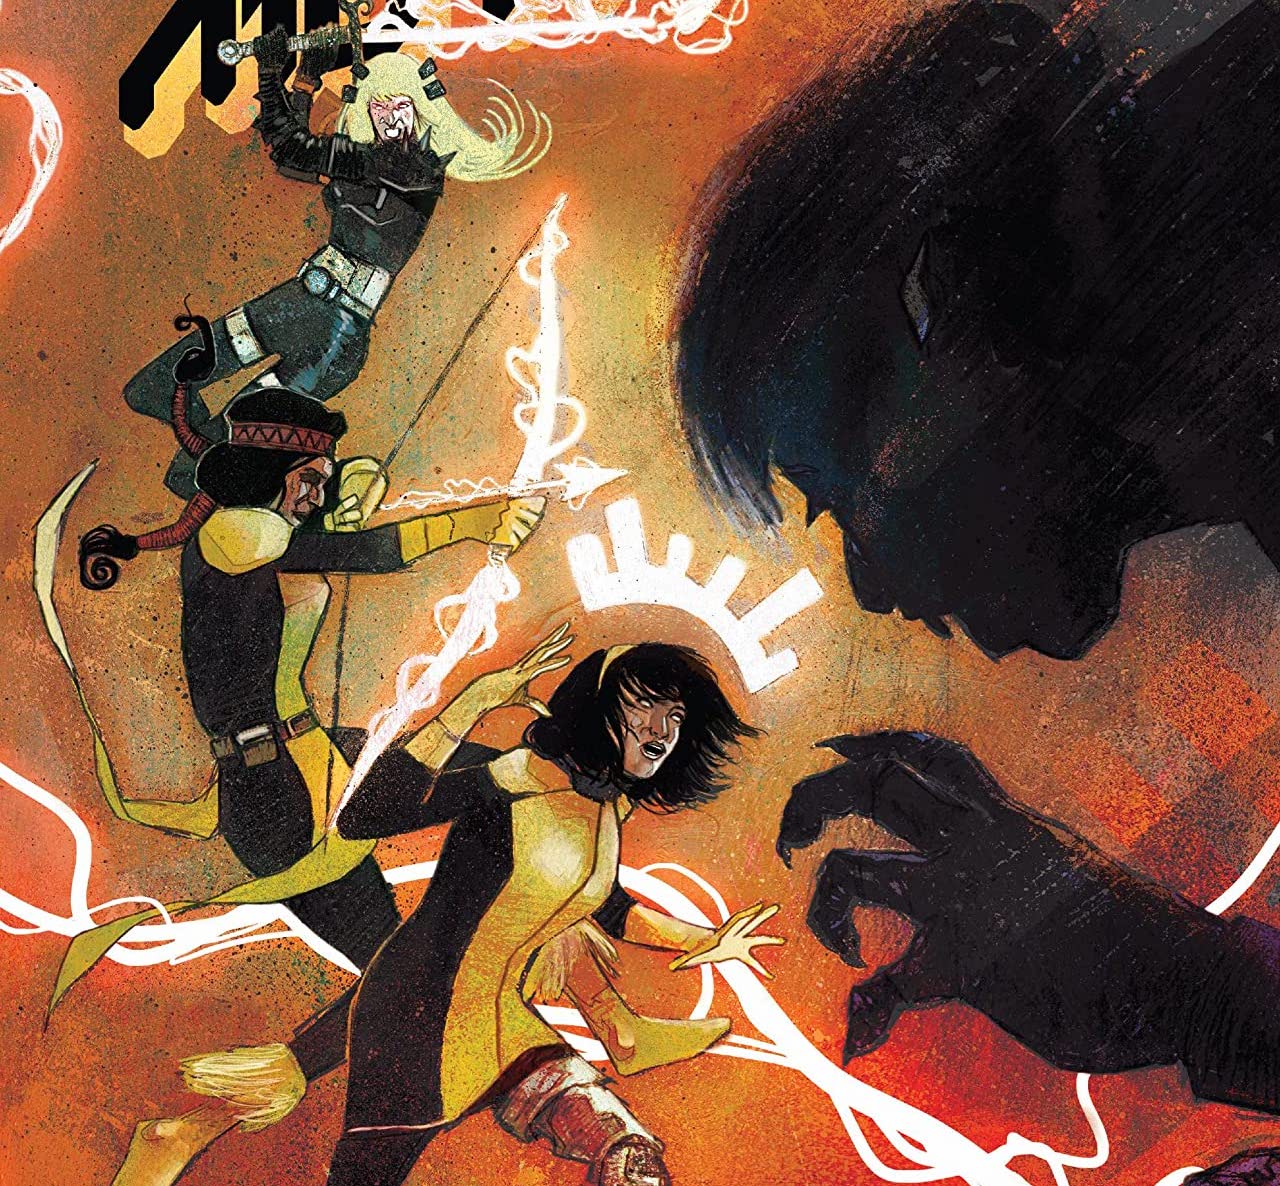 'New Mutants' #21 is exciting, impactful, and sincere